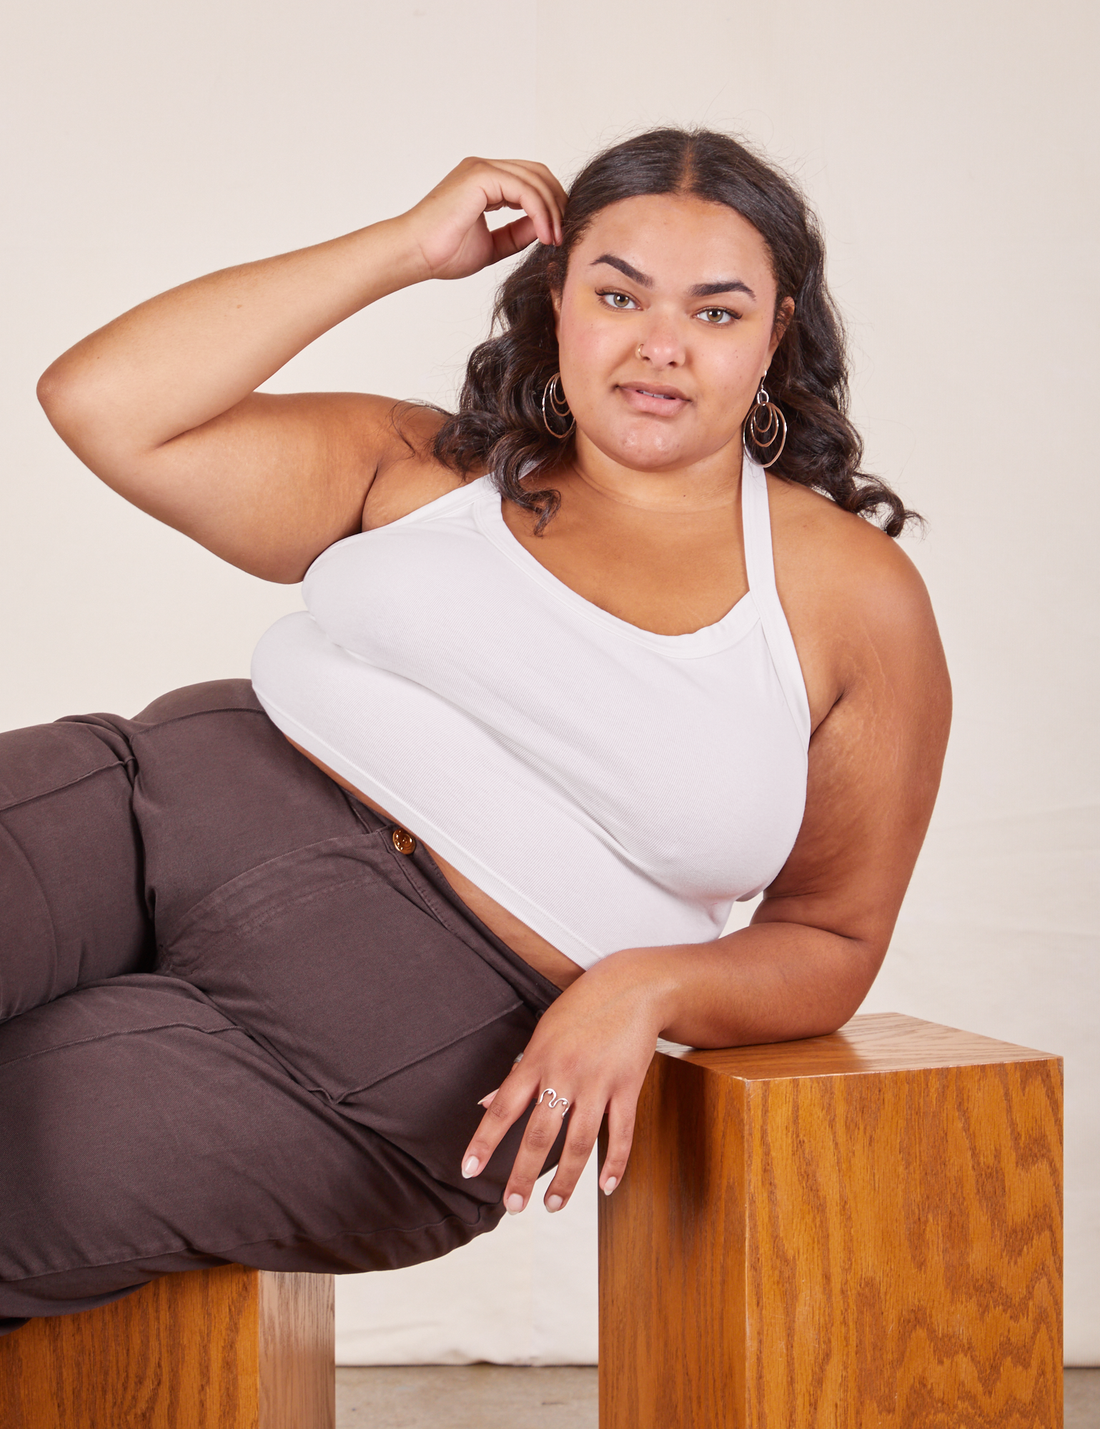 Alicia is 5'9" and wearing XL Halter Top in Vintage Off-White paired with espresso brown Western Pants. She is sitting sideways on a wooden box and her right elbow is leaning on another wooden box.